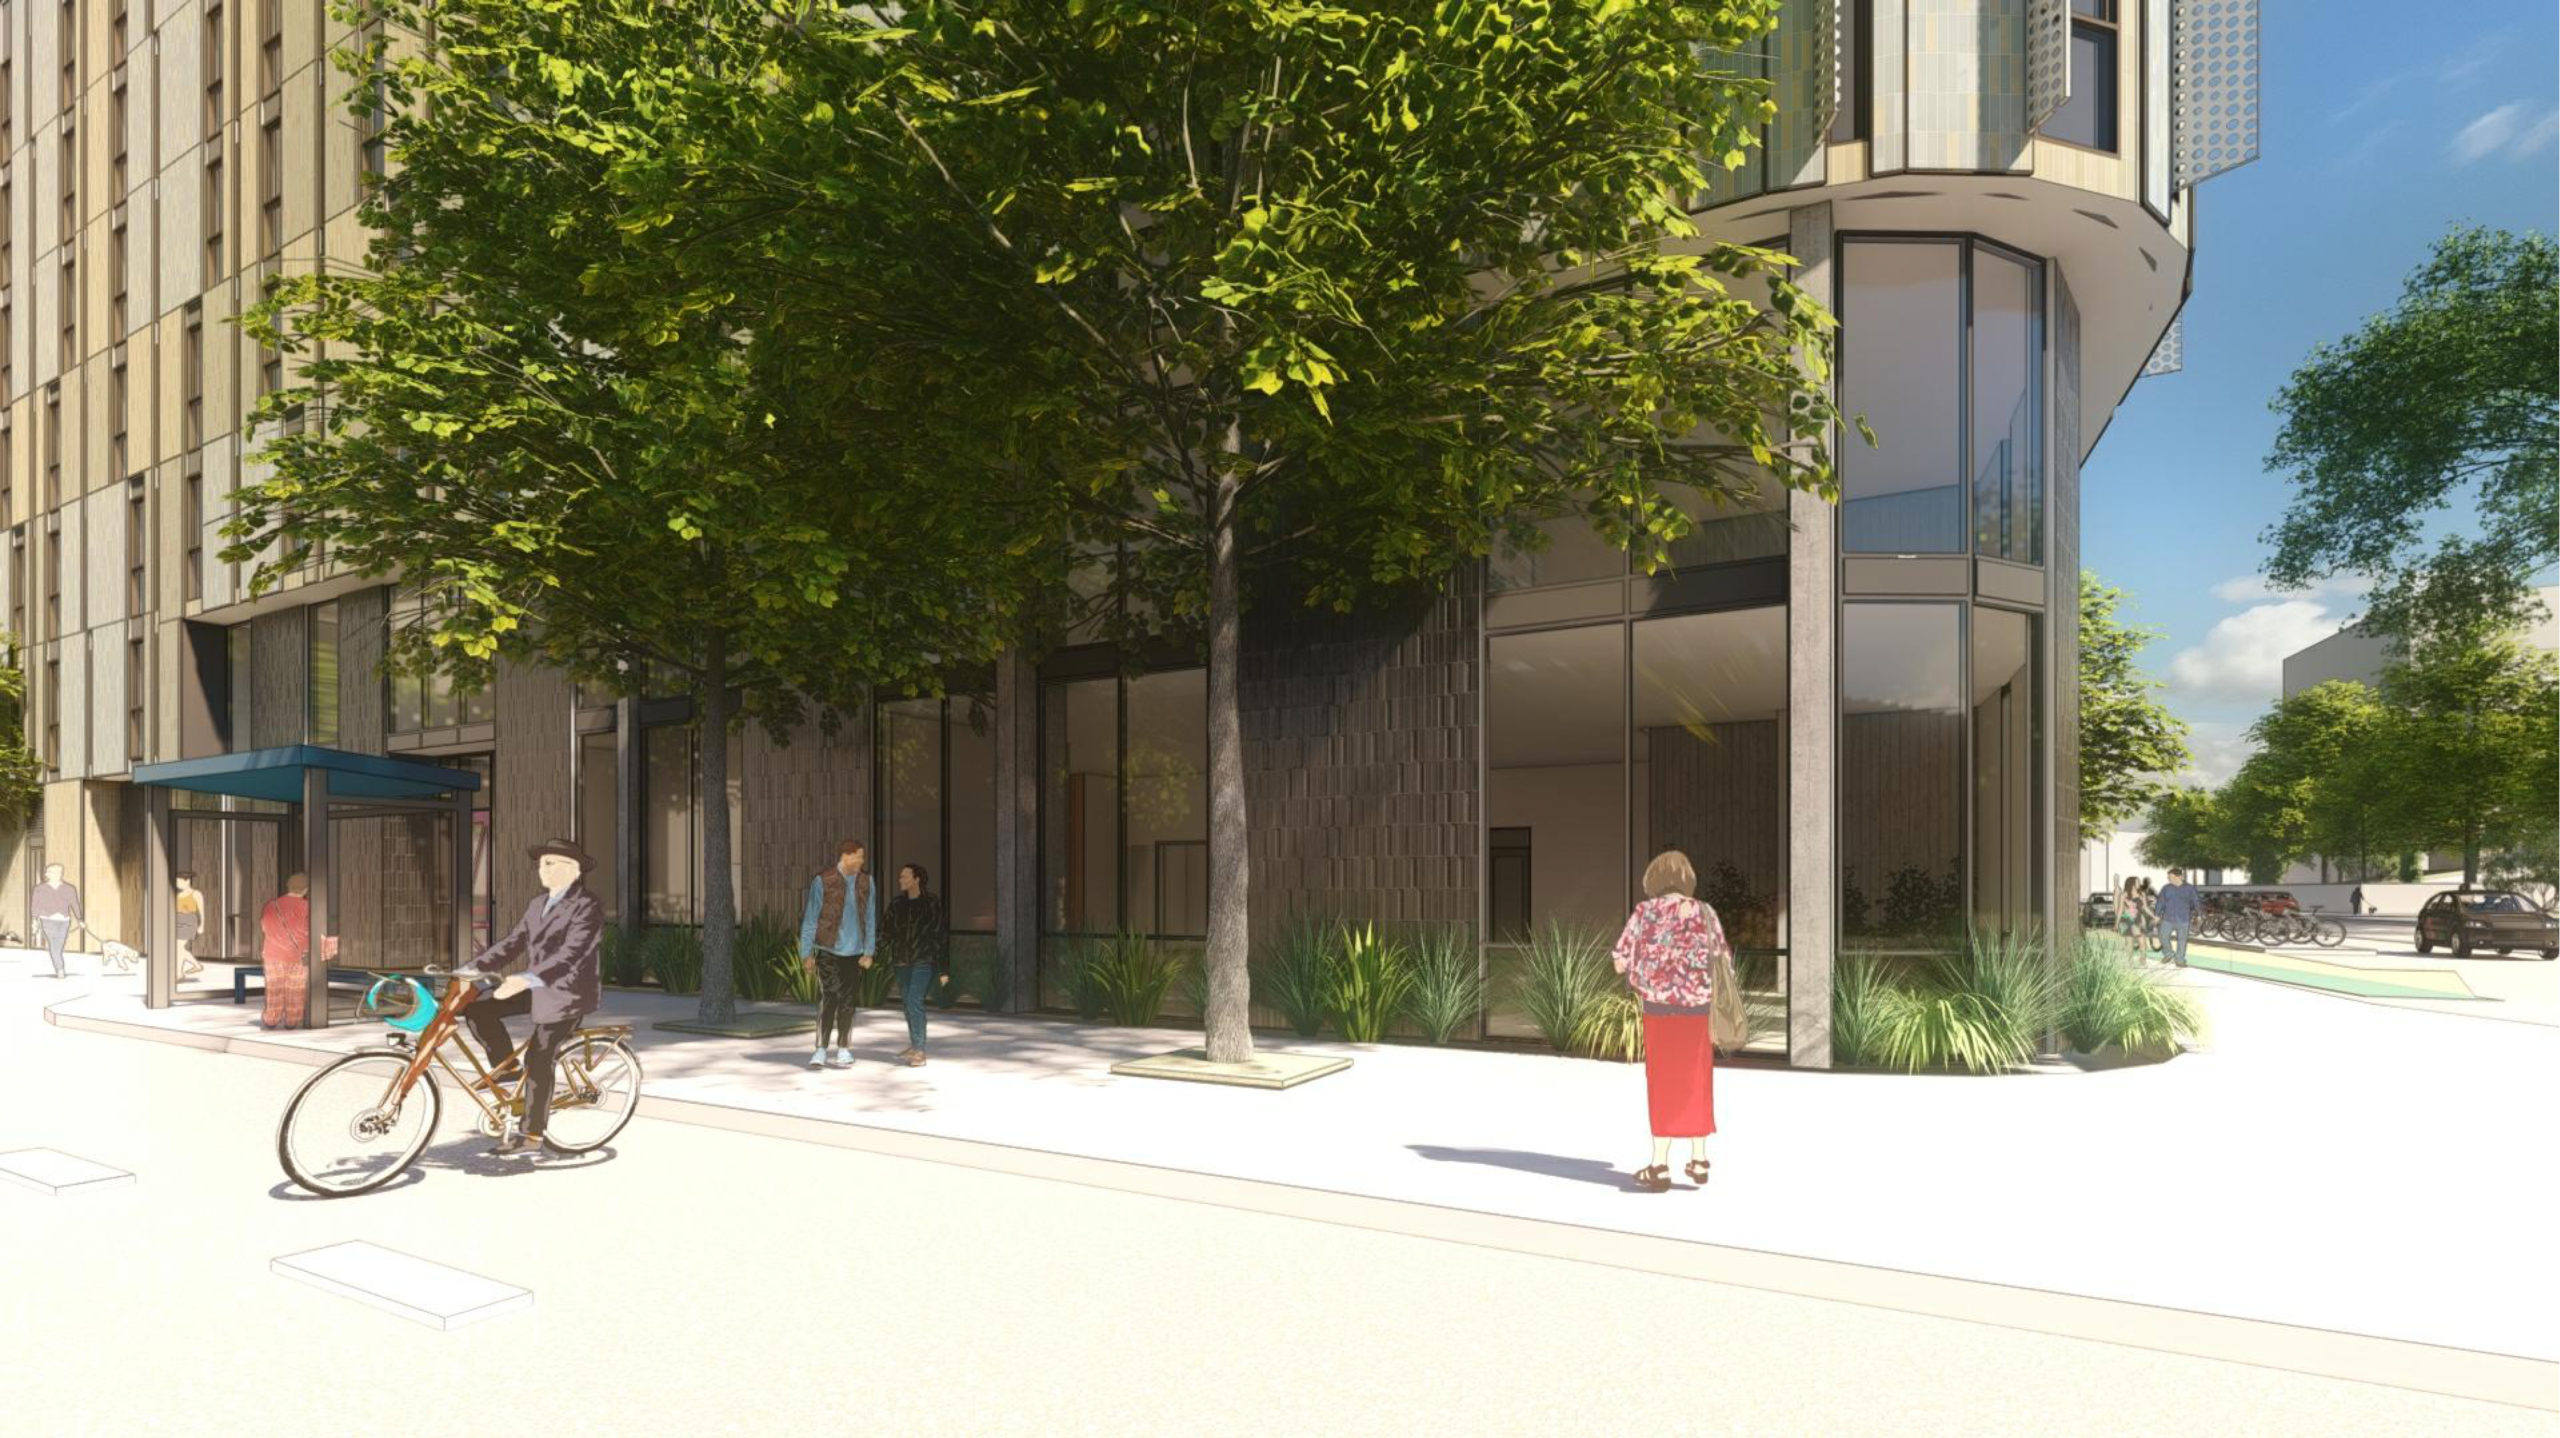 3485 Cesar Chavez Street activated sidewalk, rendering by David Baker Architects